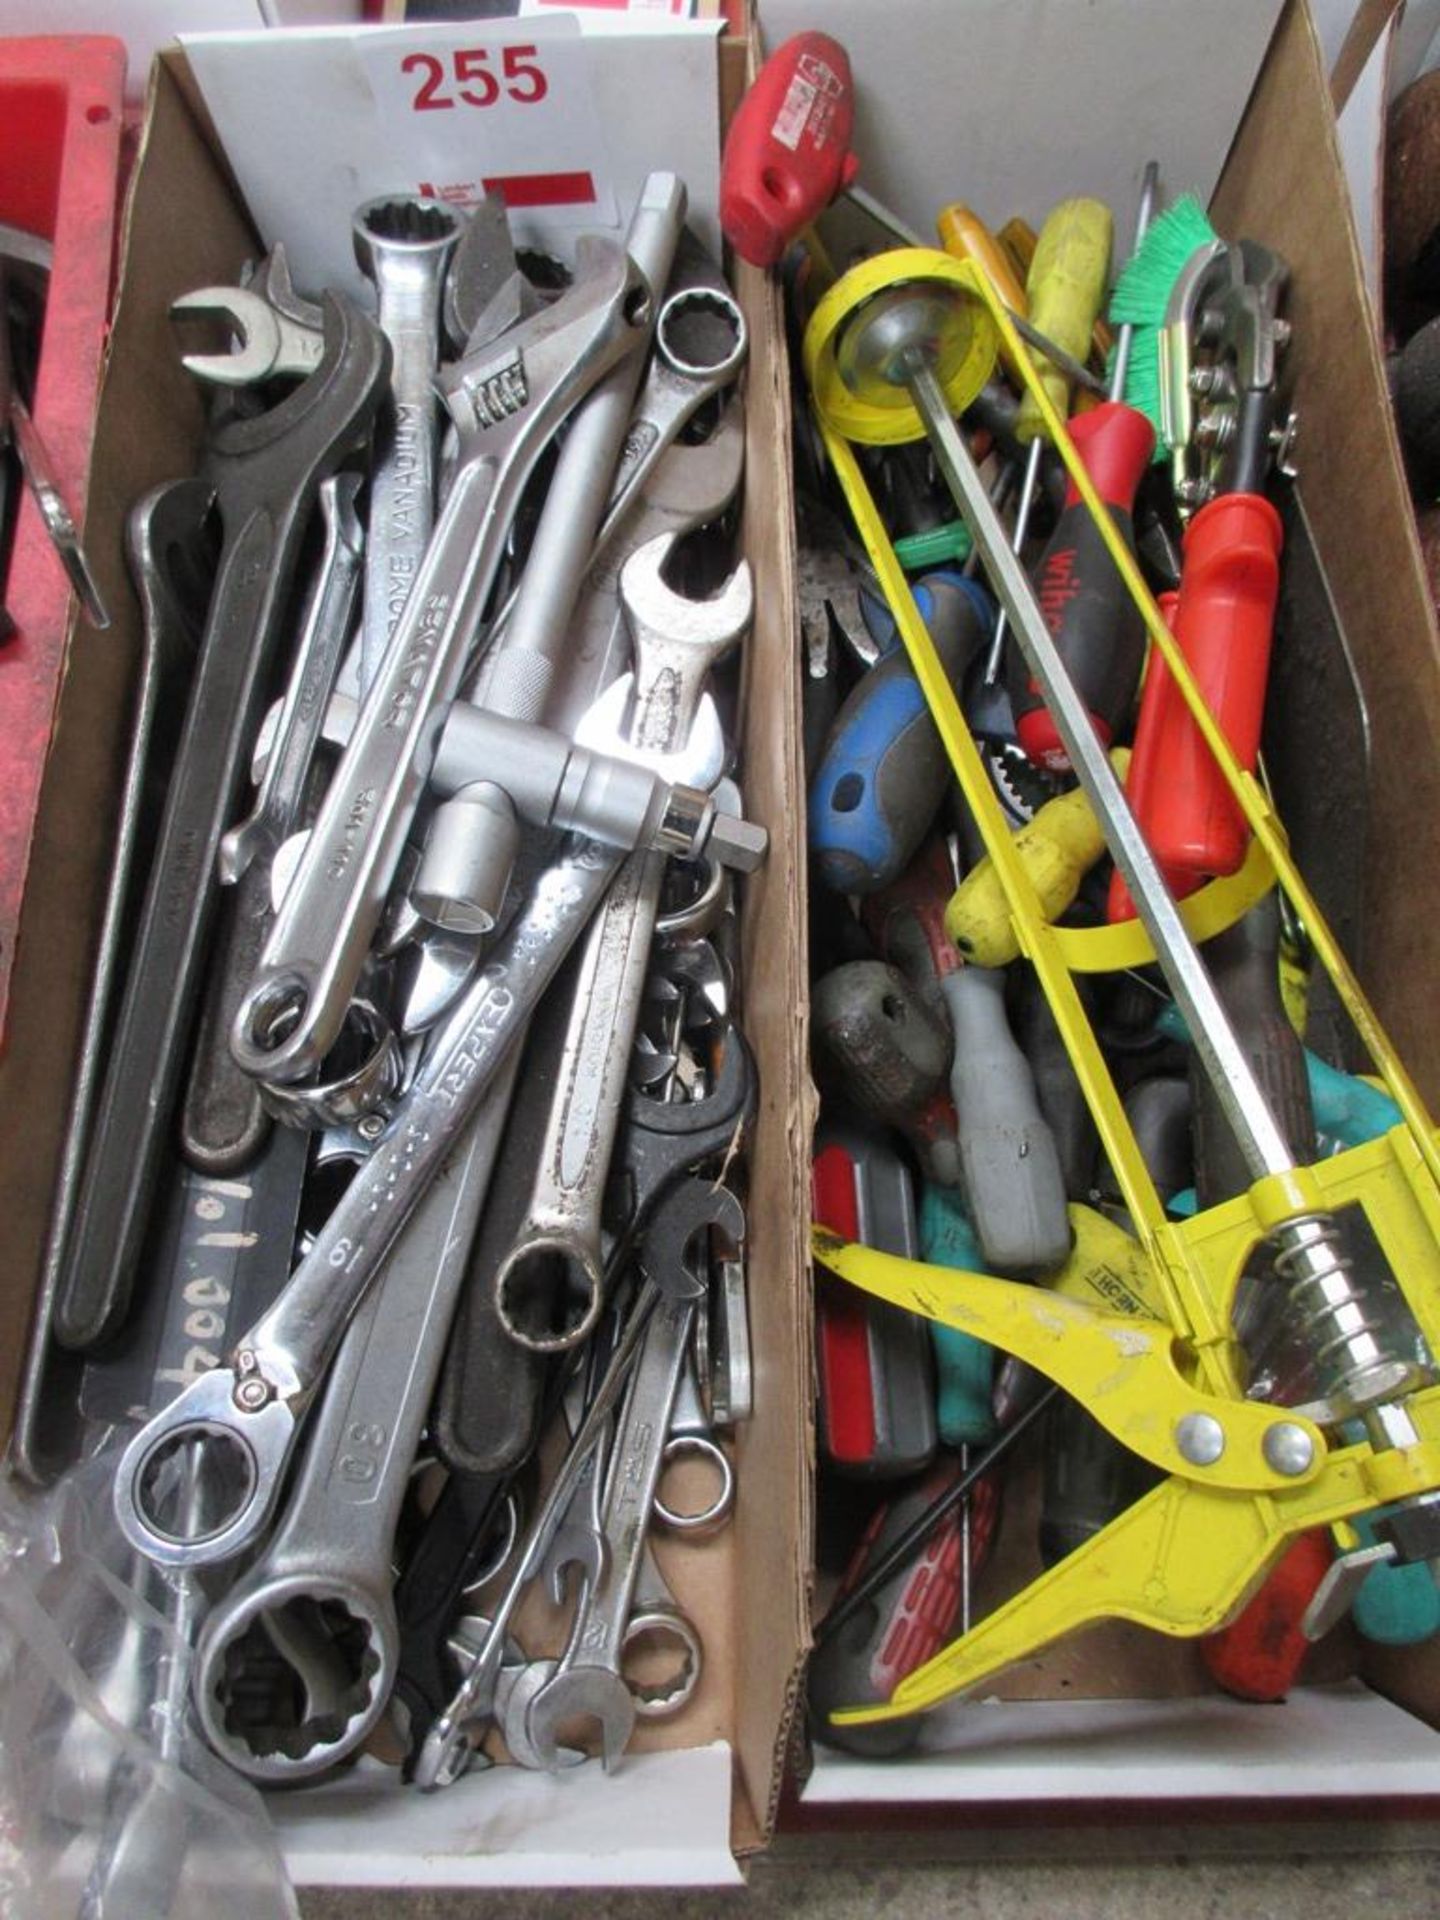 Quantity of assorted hand tools